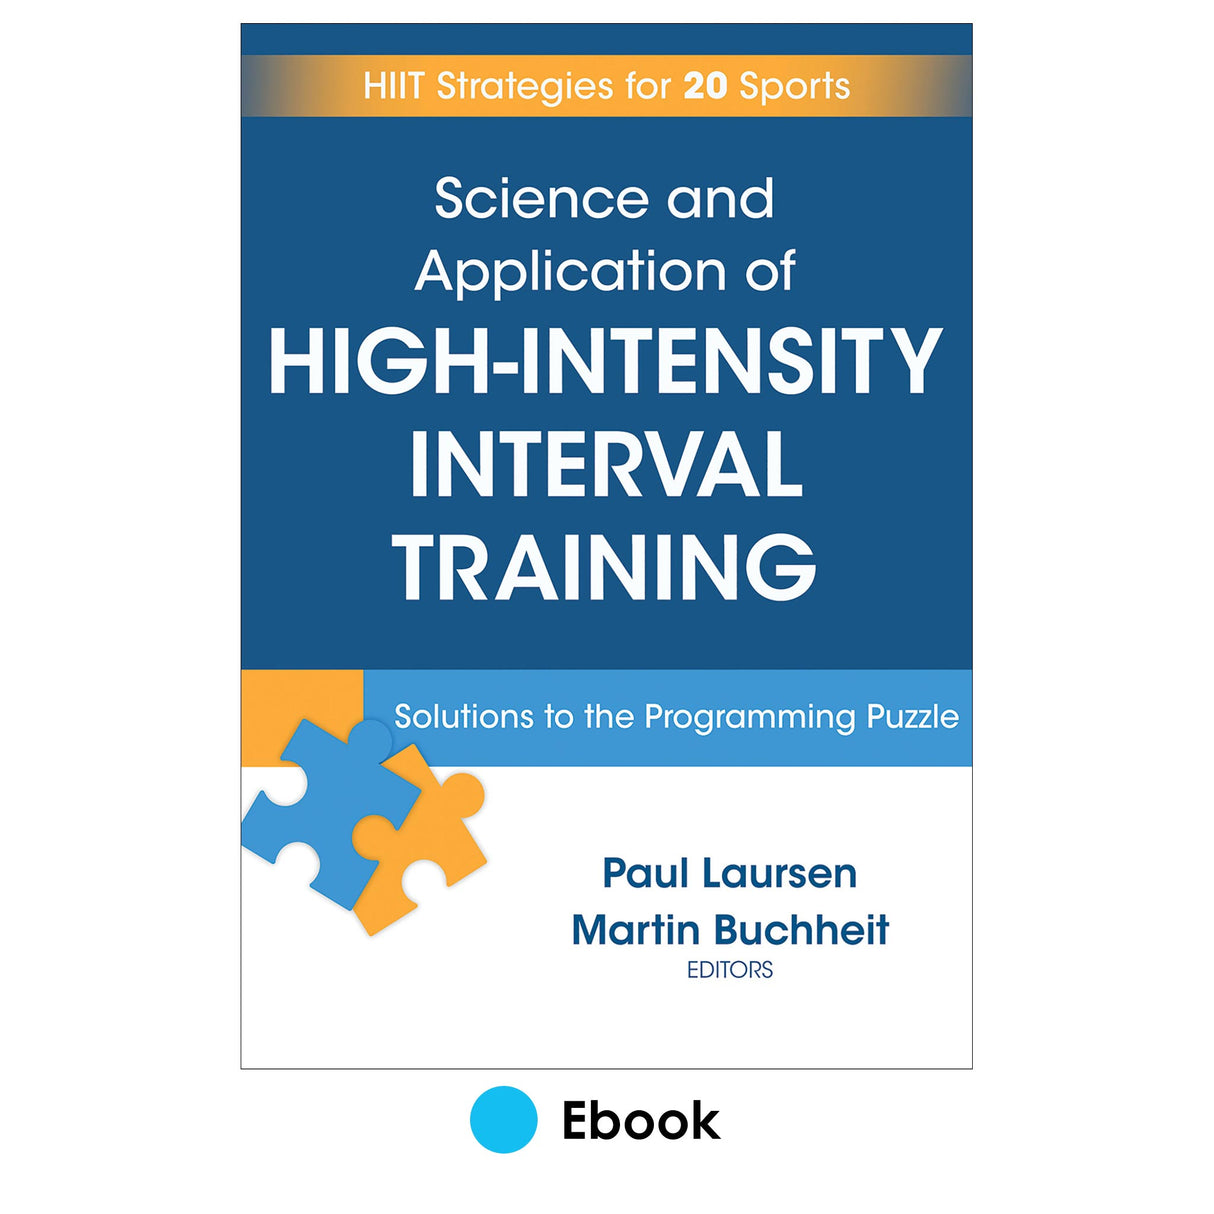 Science and Application of High-Intensity Interval Training epub